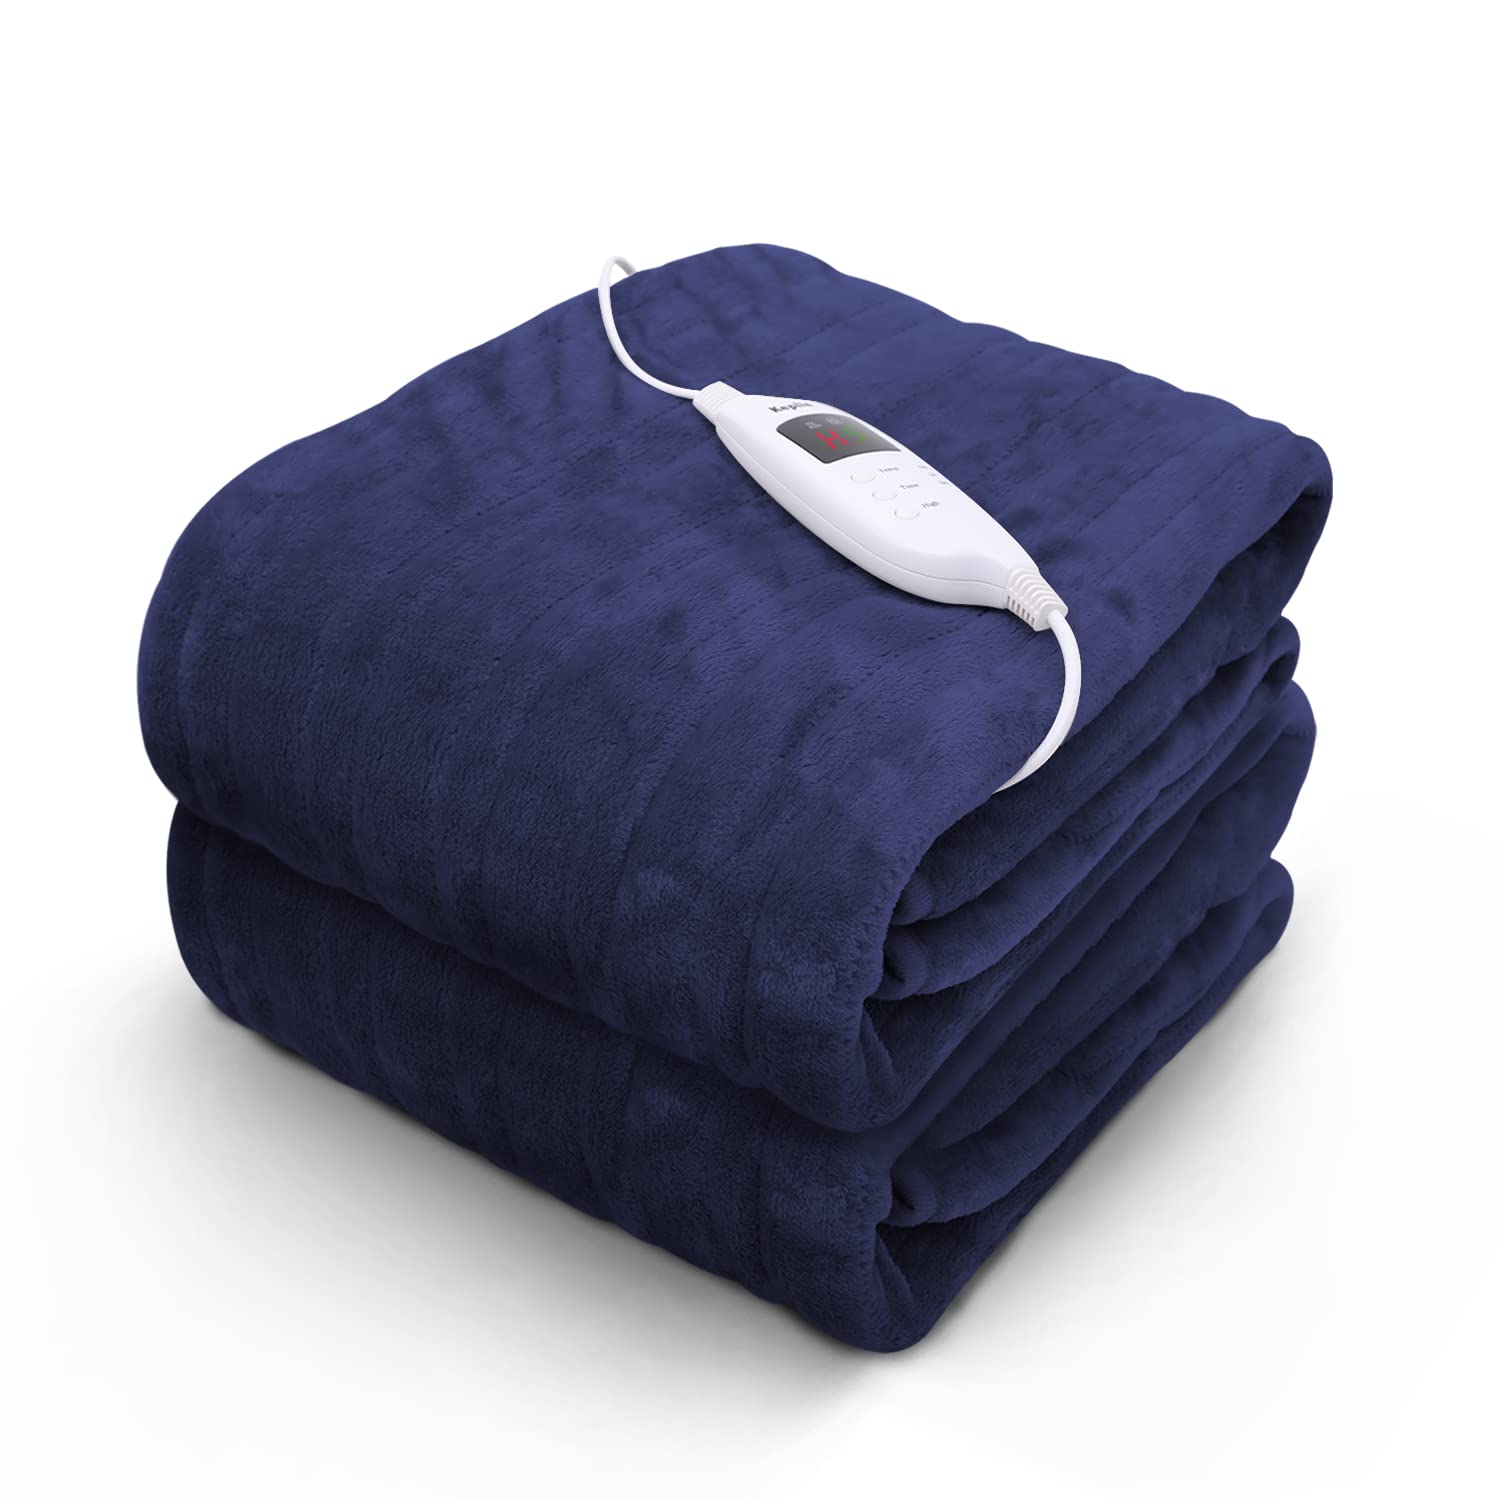 KEPLIN Large Electric Heated Throw Blanket - Electric Blanket Throw for Bedspread with 9 Heat Settings & Timer | Machine Washable Fleece Wool Duvet | Single Electric Overblanket 160 x 130 cm - Navy